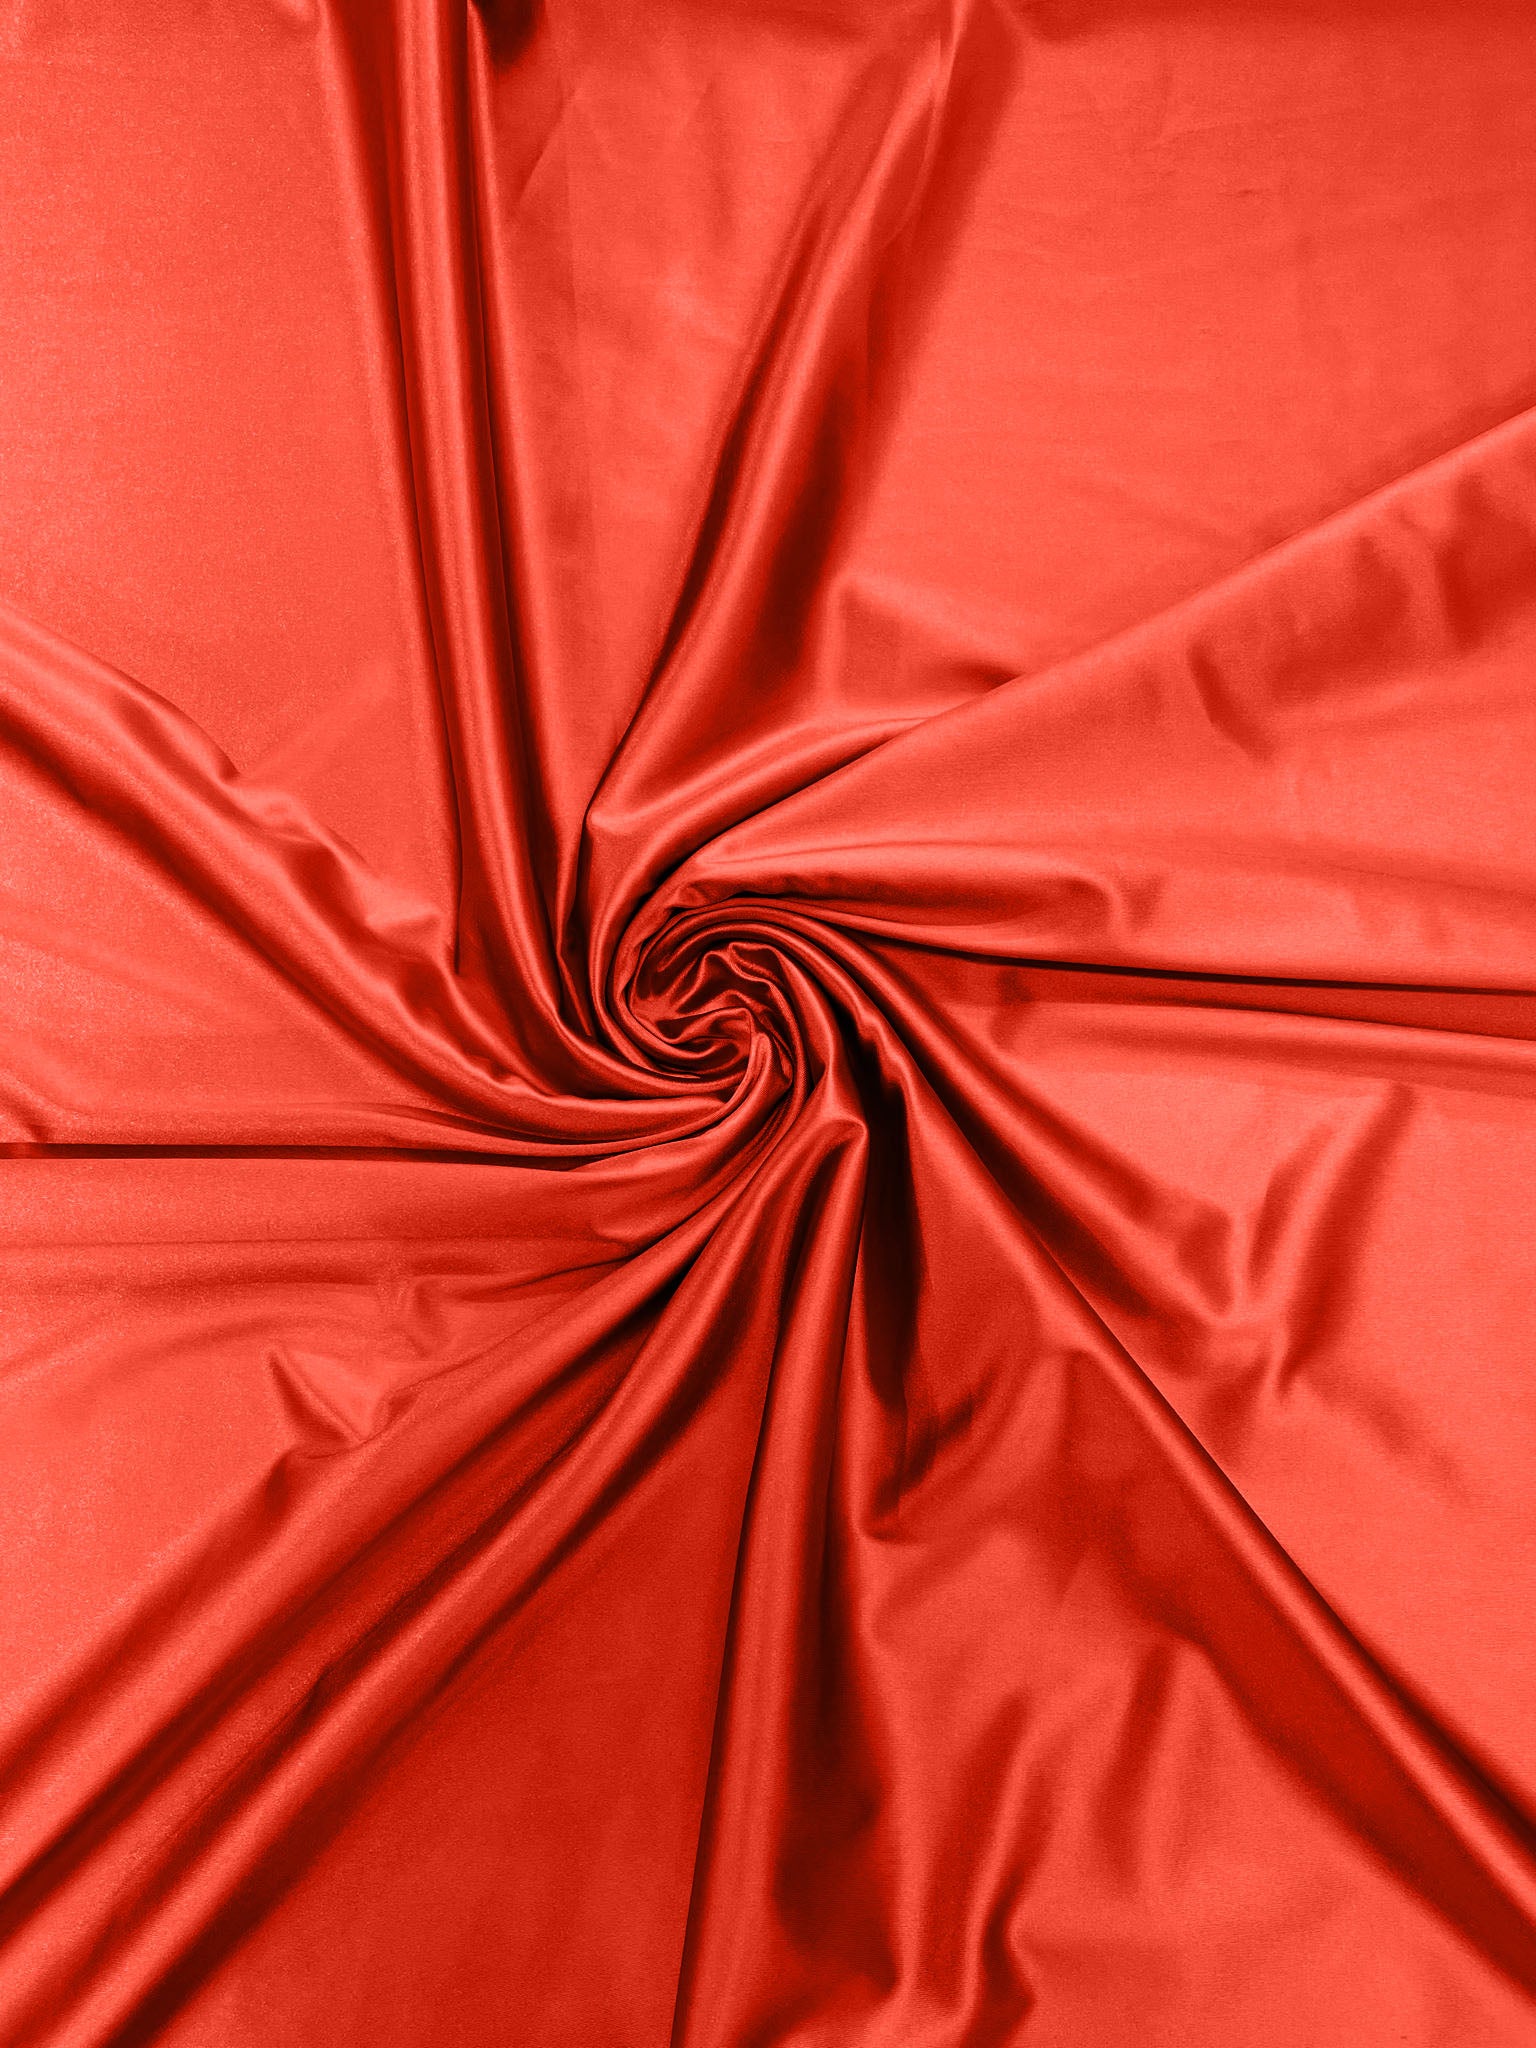 Tomato Red Heavy Shiny Satin Stretch Spandex Fabric/58 Inches Wide/Prom/Wedding/Cosplays.